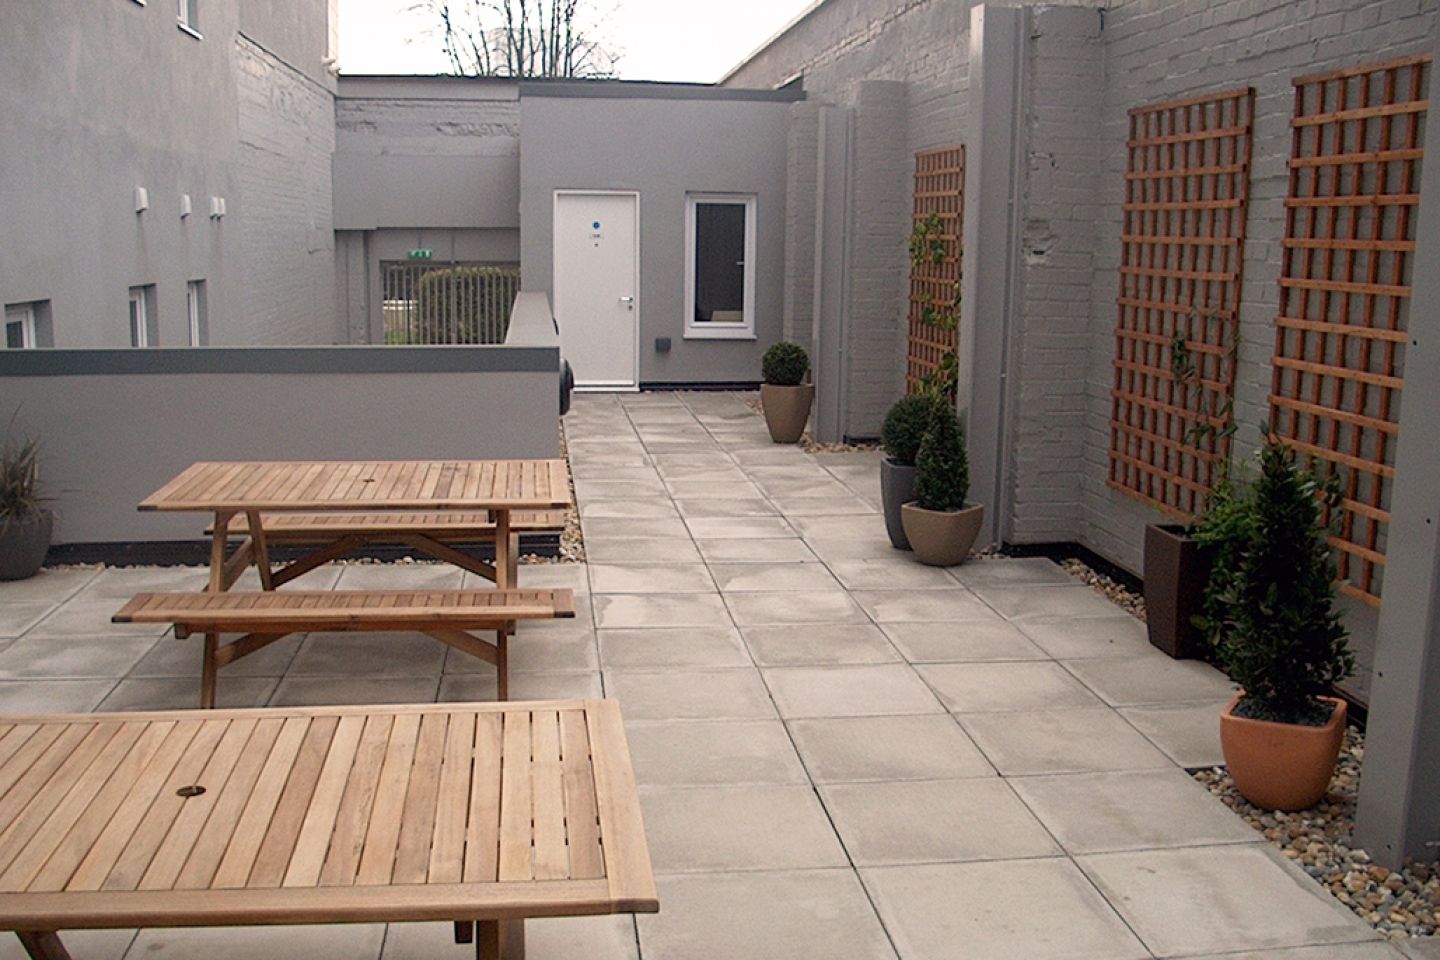 Private paved courtyard with two picnic tables, pot plants and trellises.